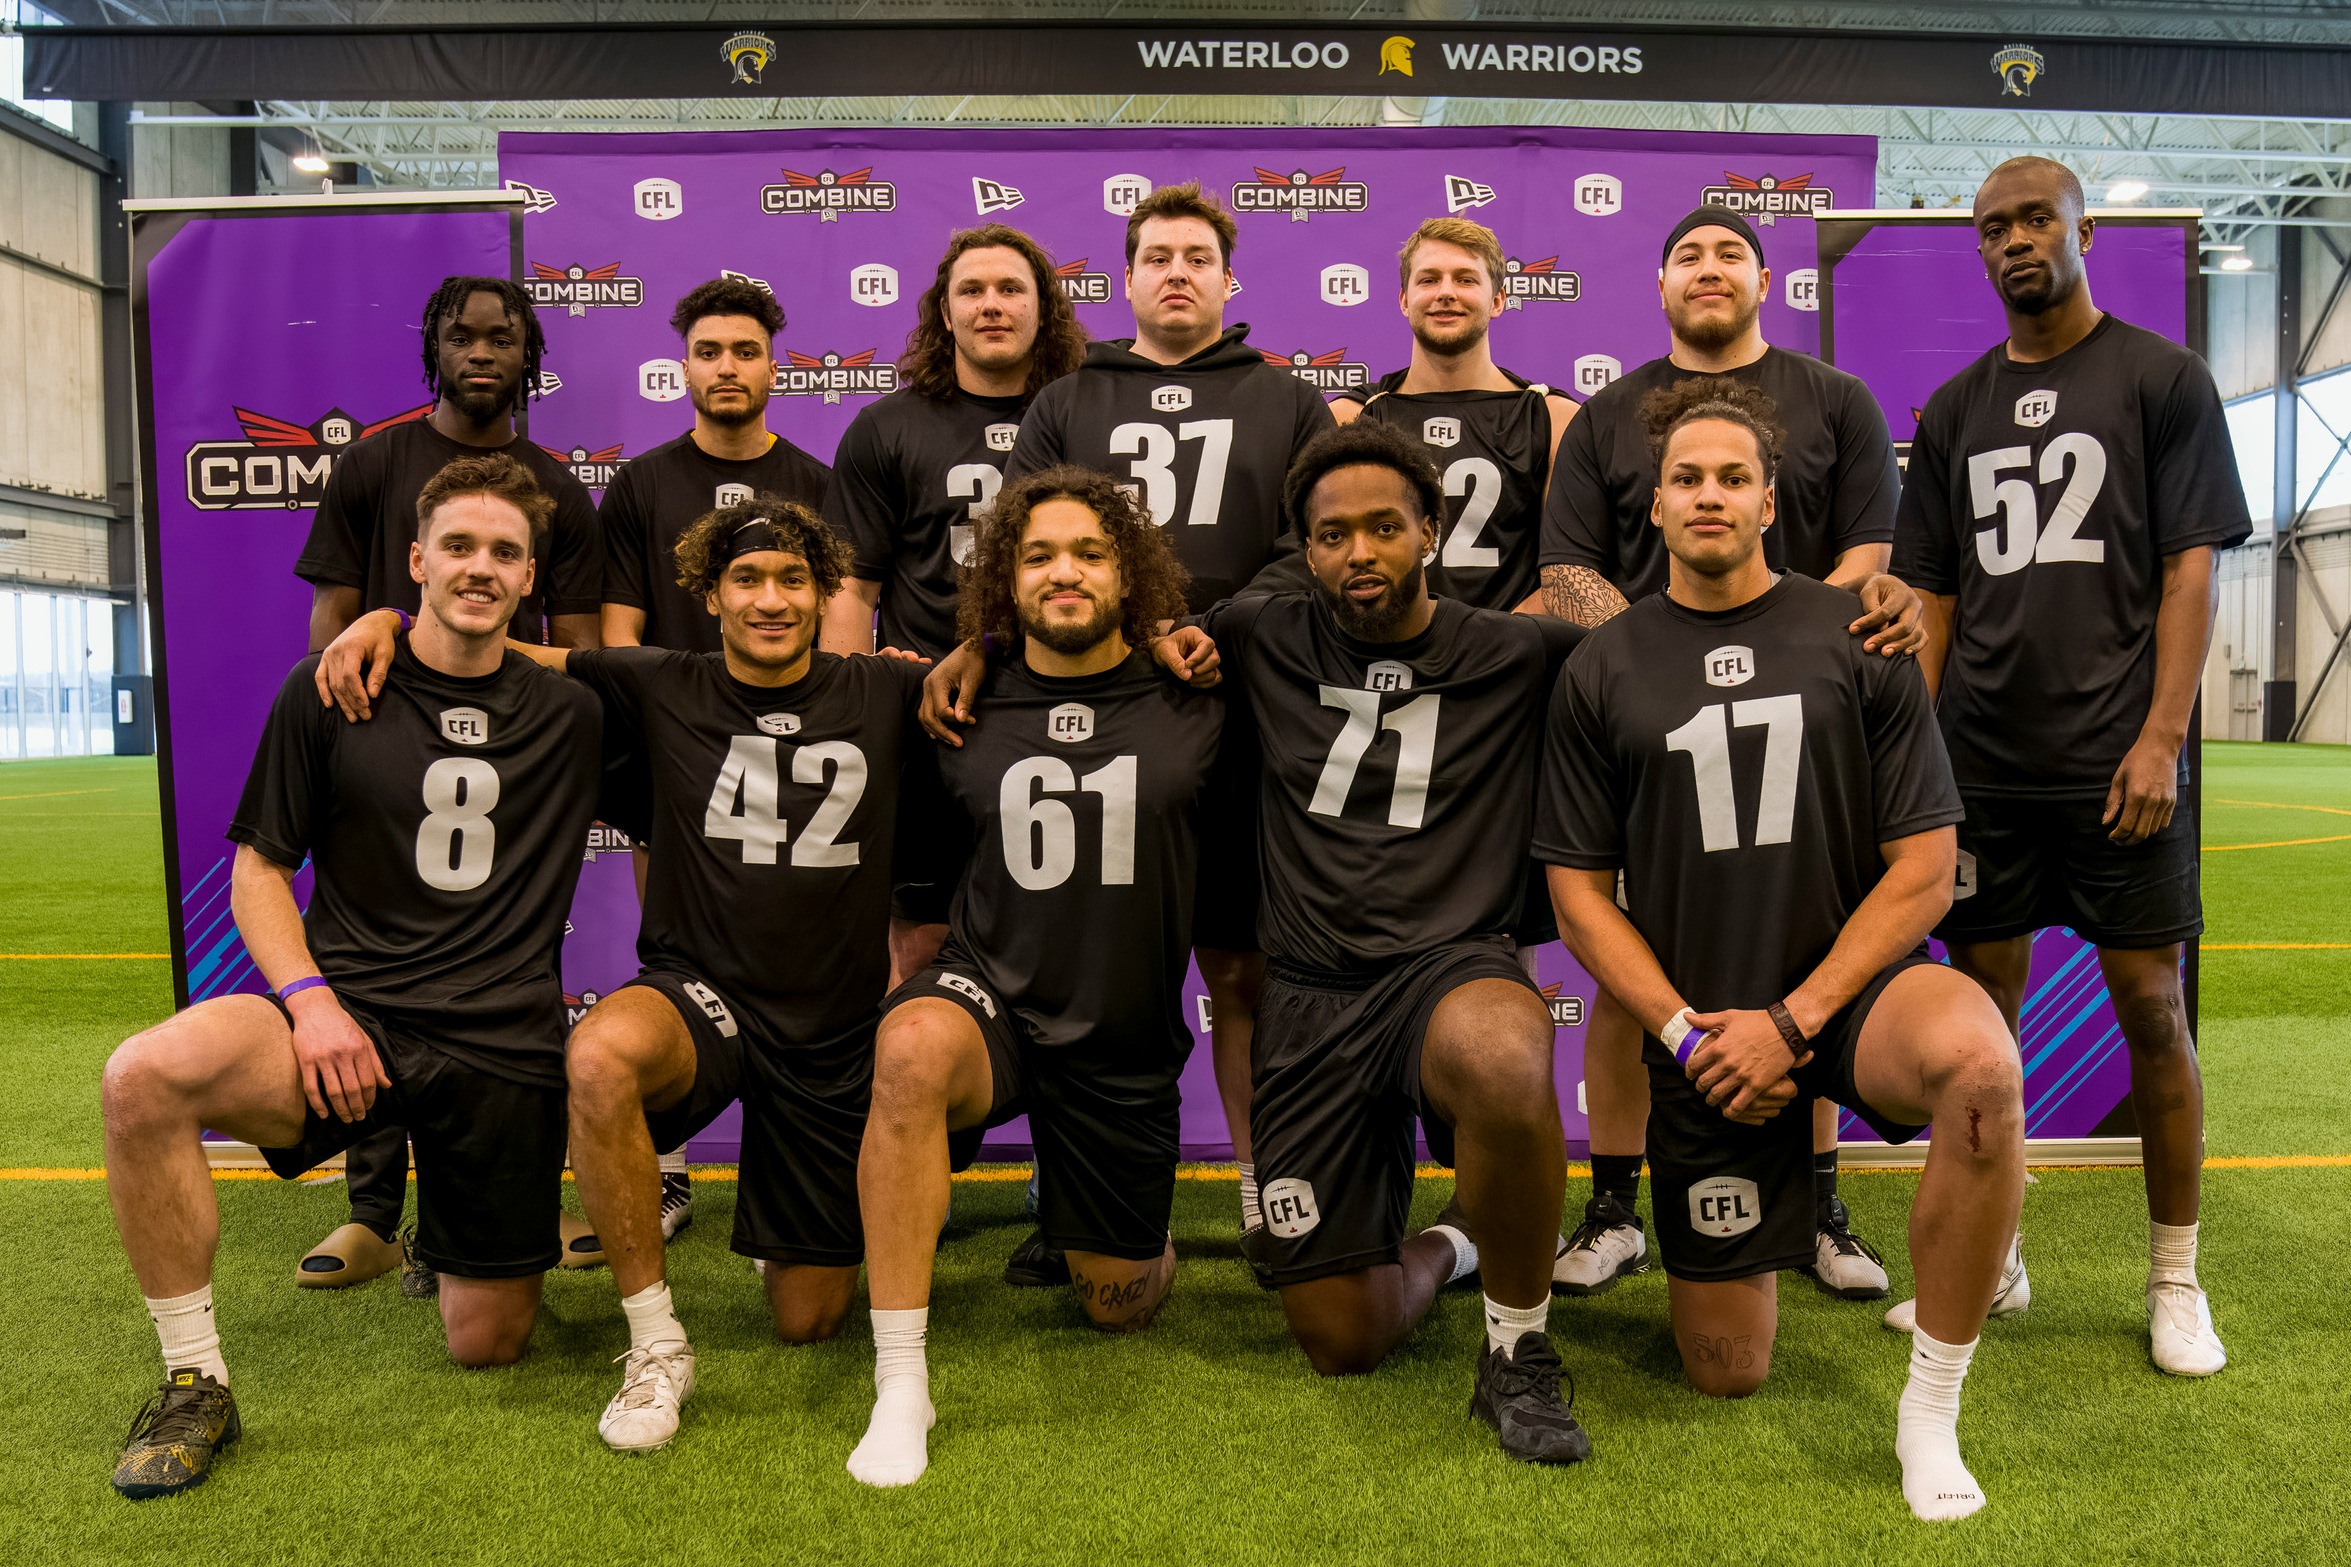 Three Huskies - Howard, Jean-Loescher, and John - invited to CFL National Combine